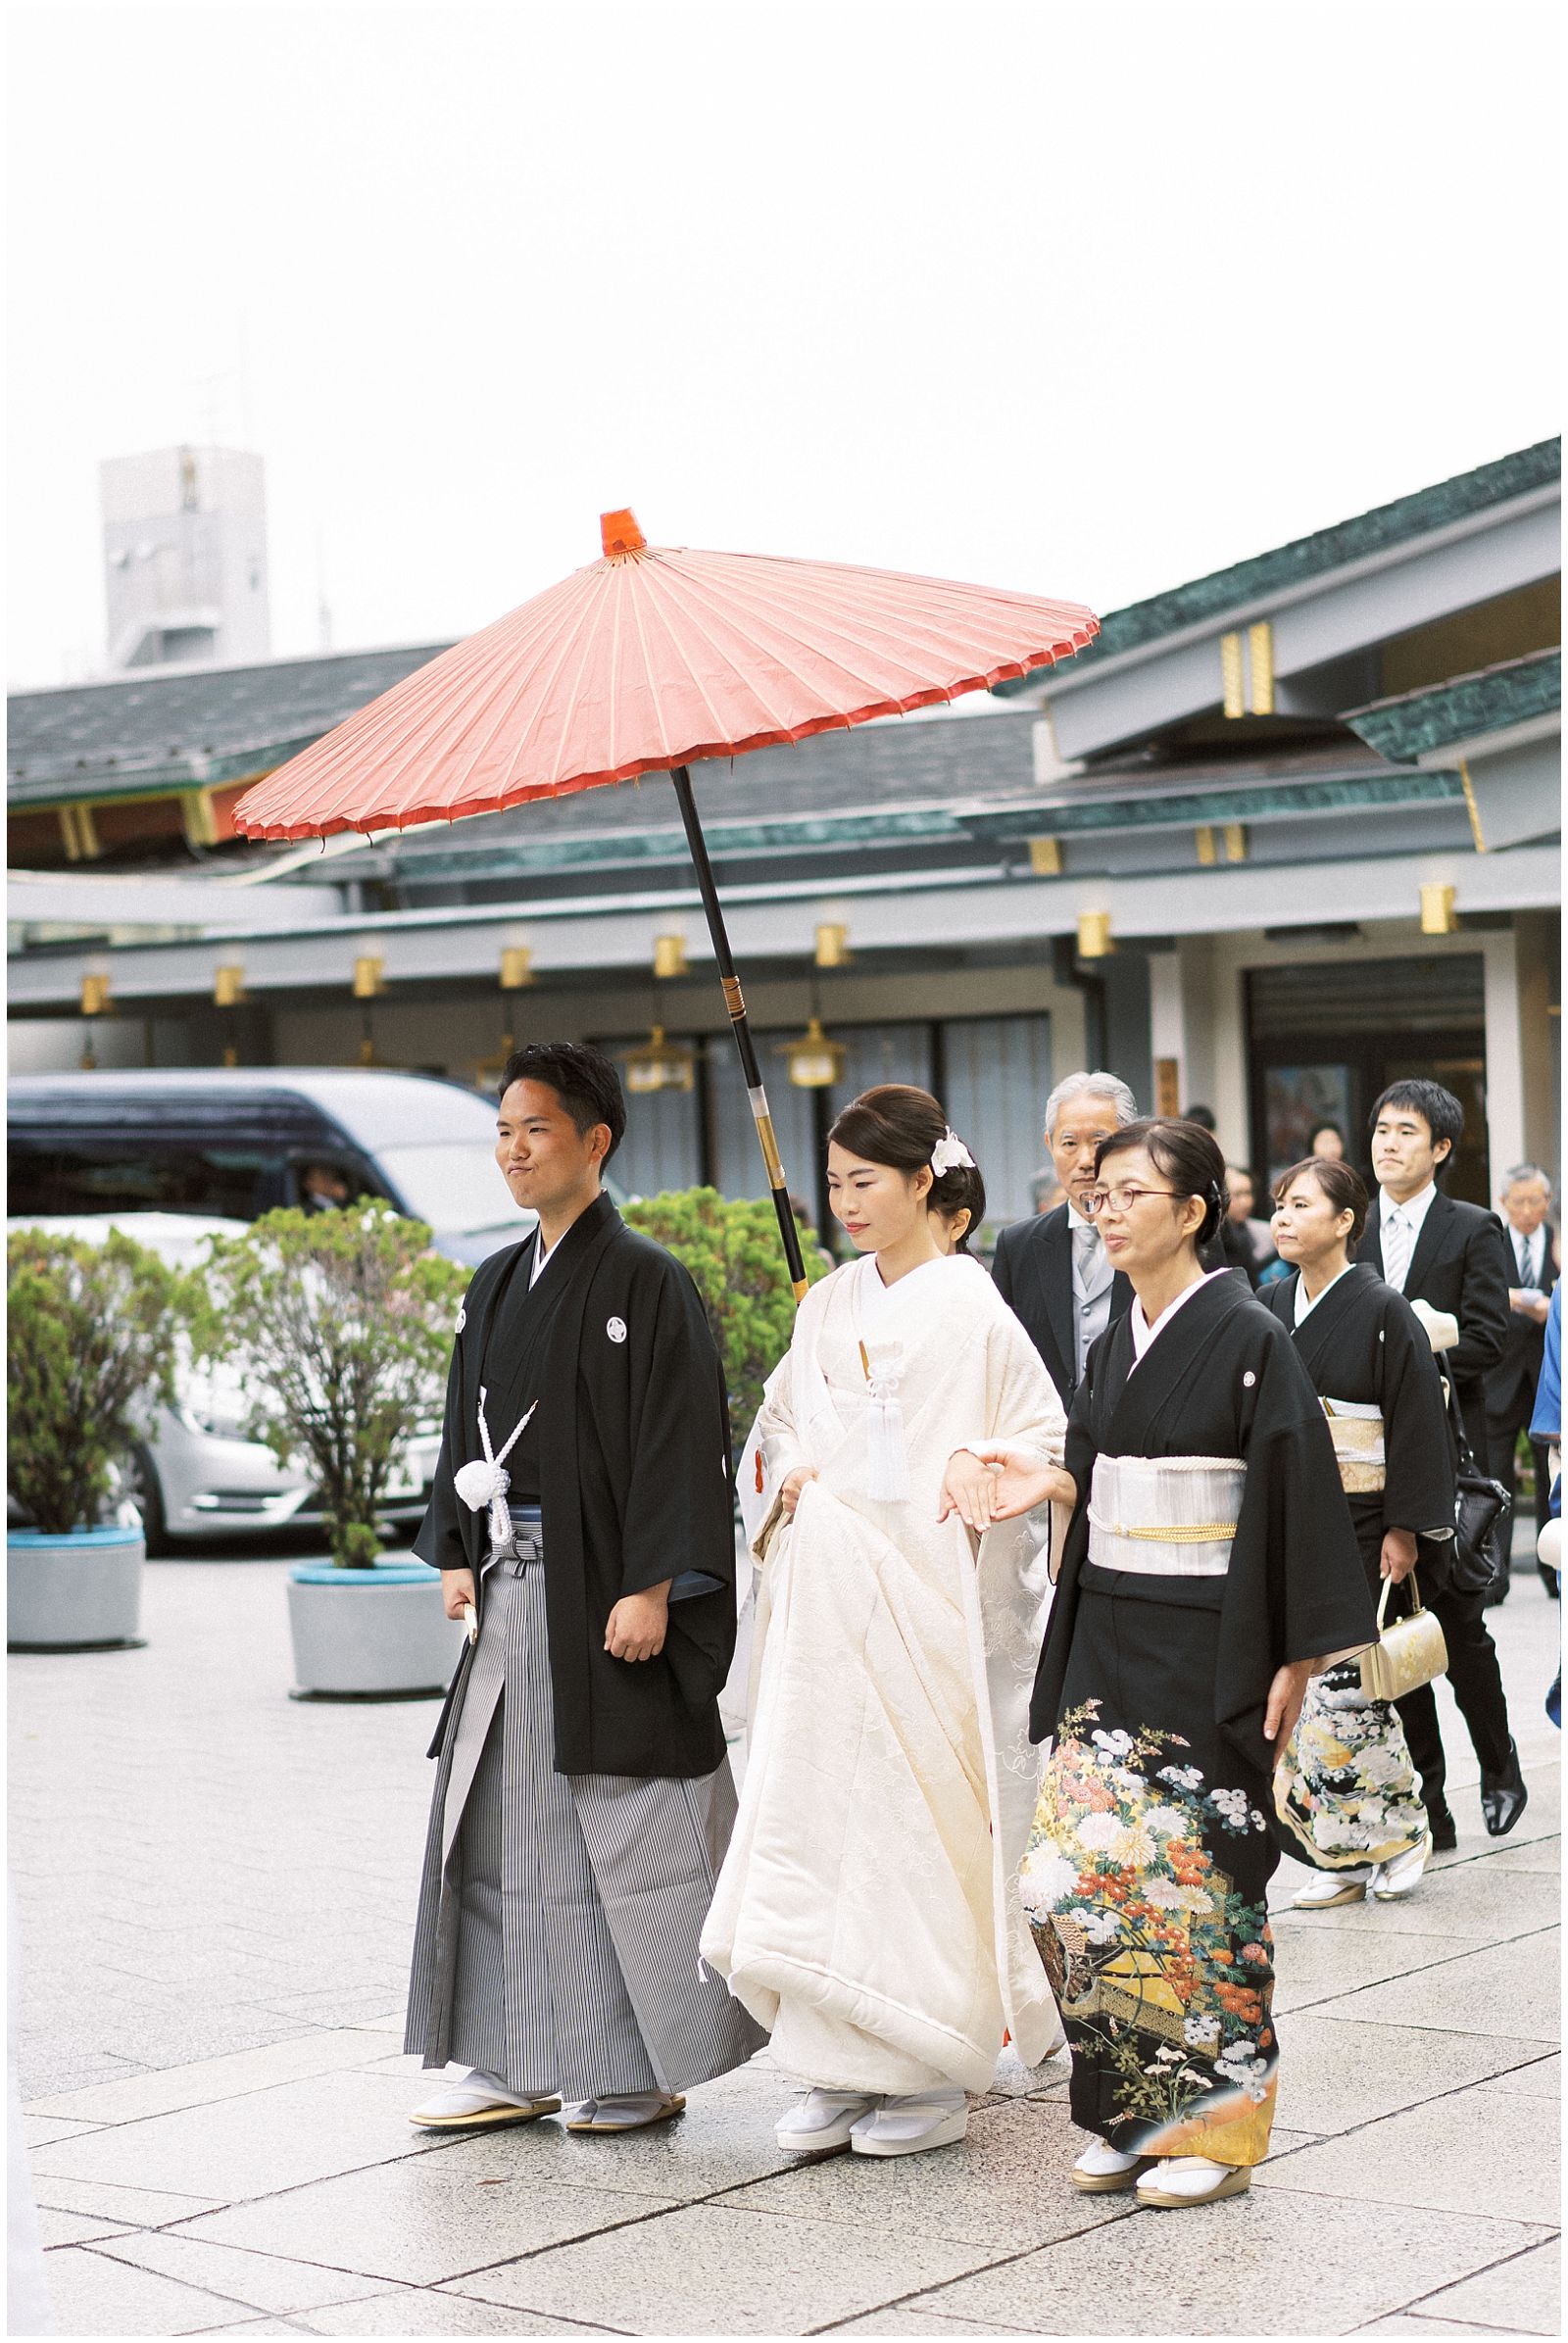 Traditional Japanese wedding in Tokyo